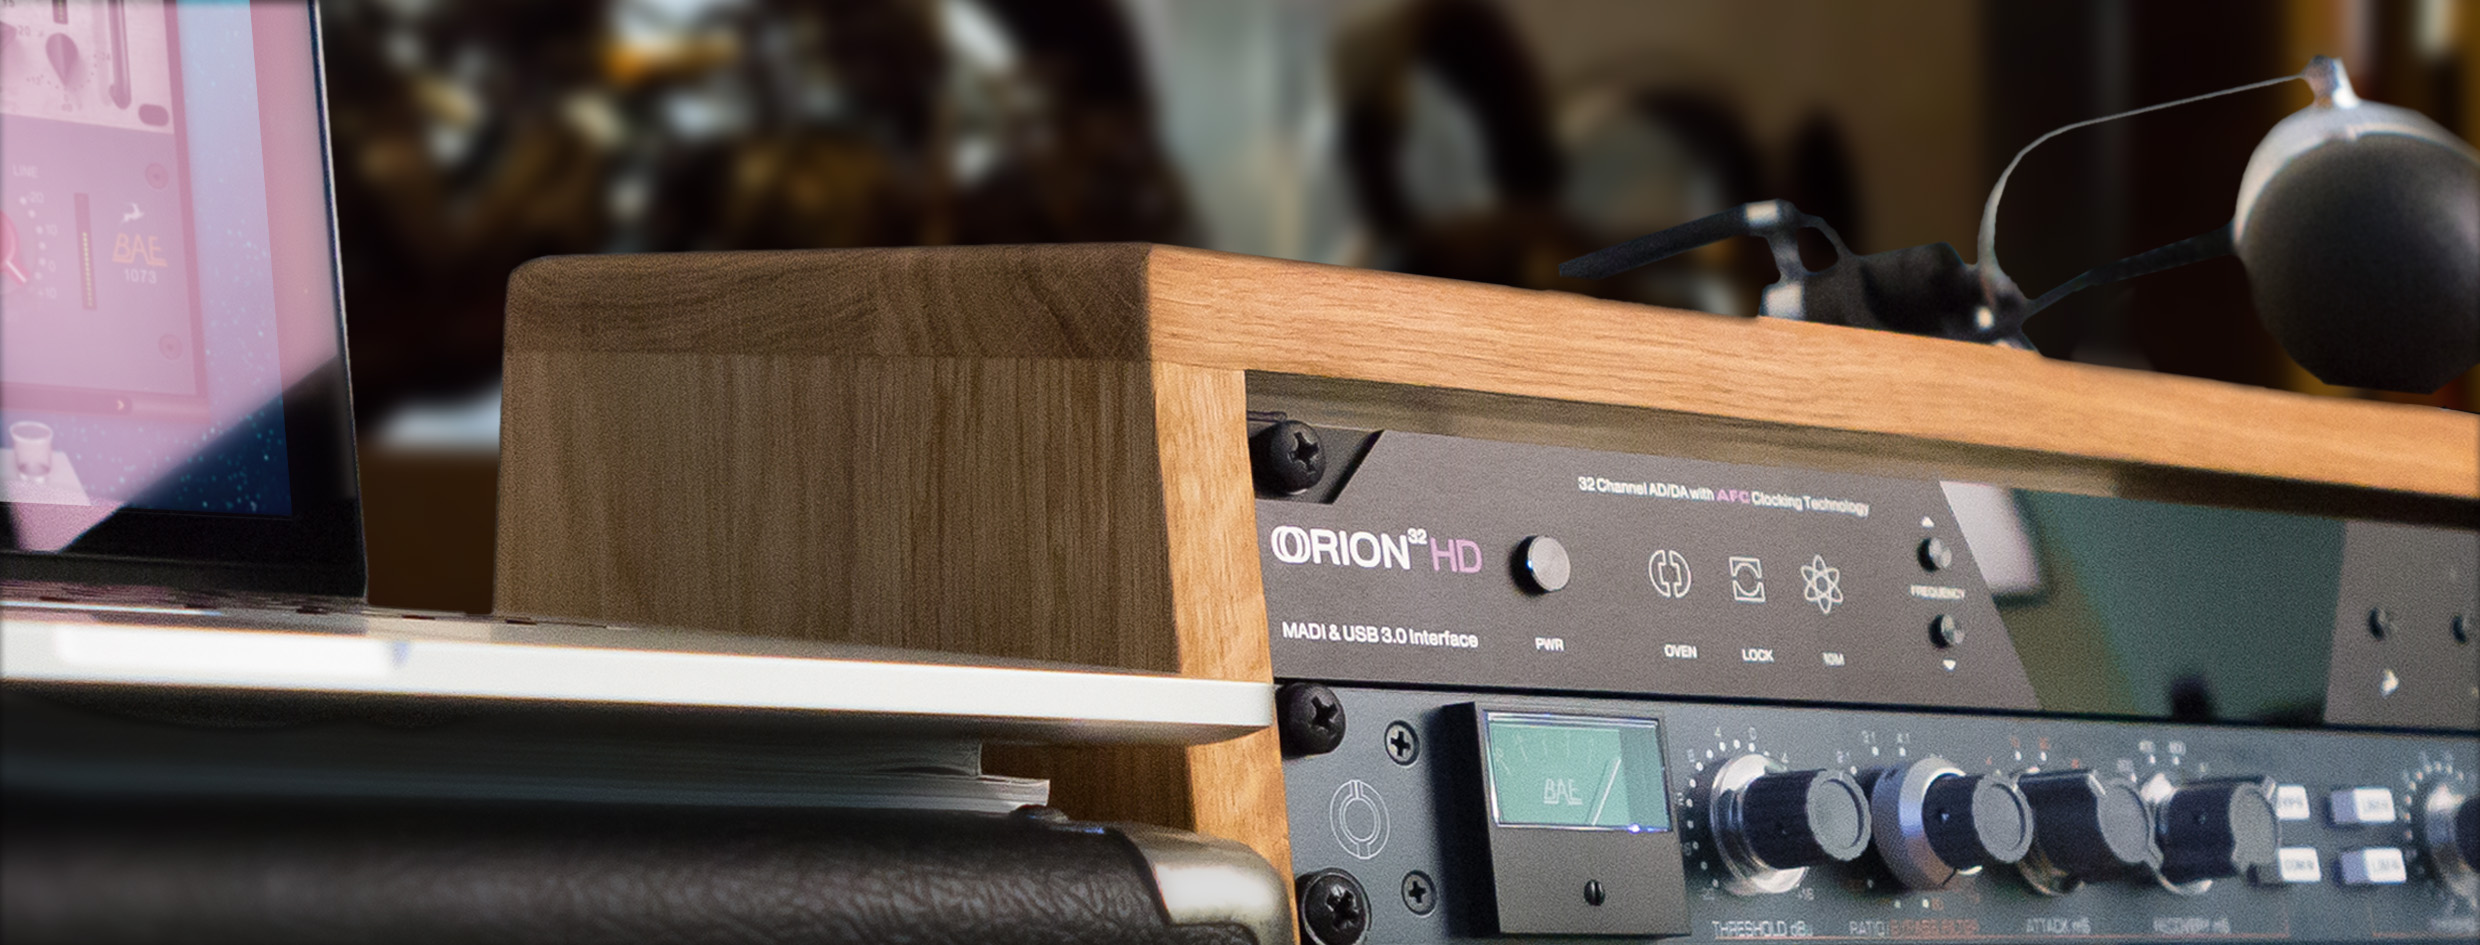 Orion32 HD won Music Players’ Best of NAMM Award